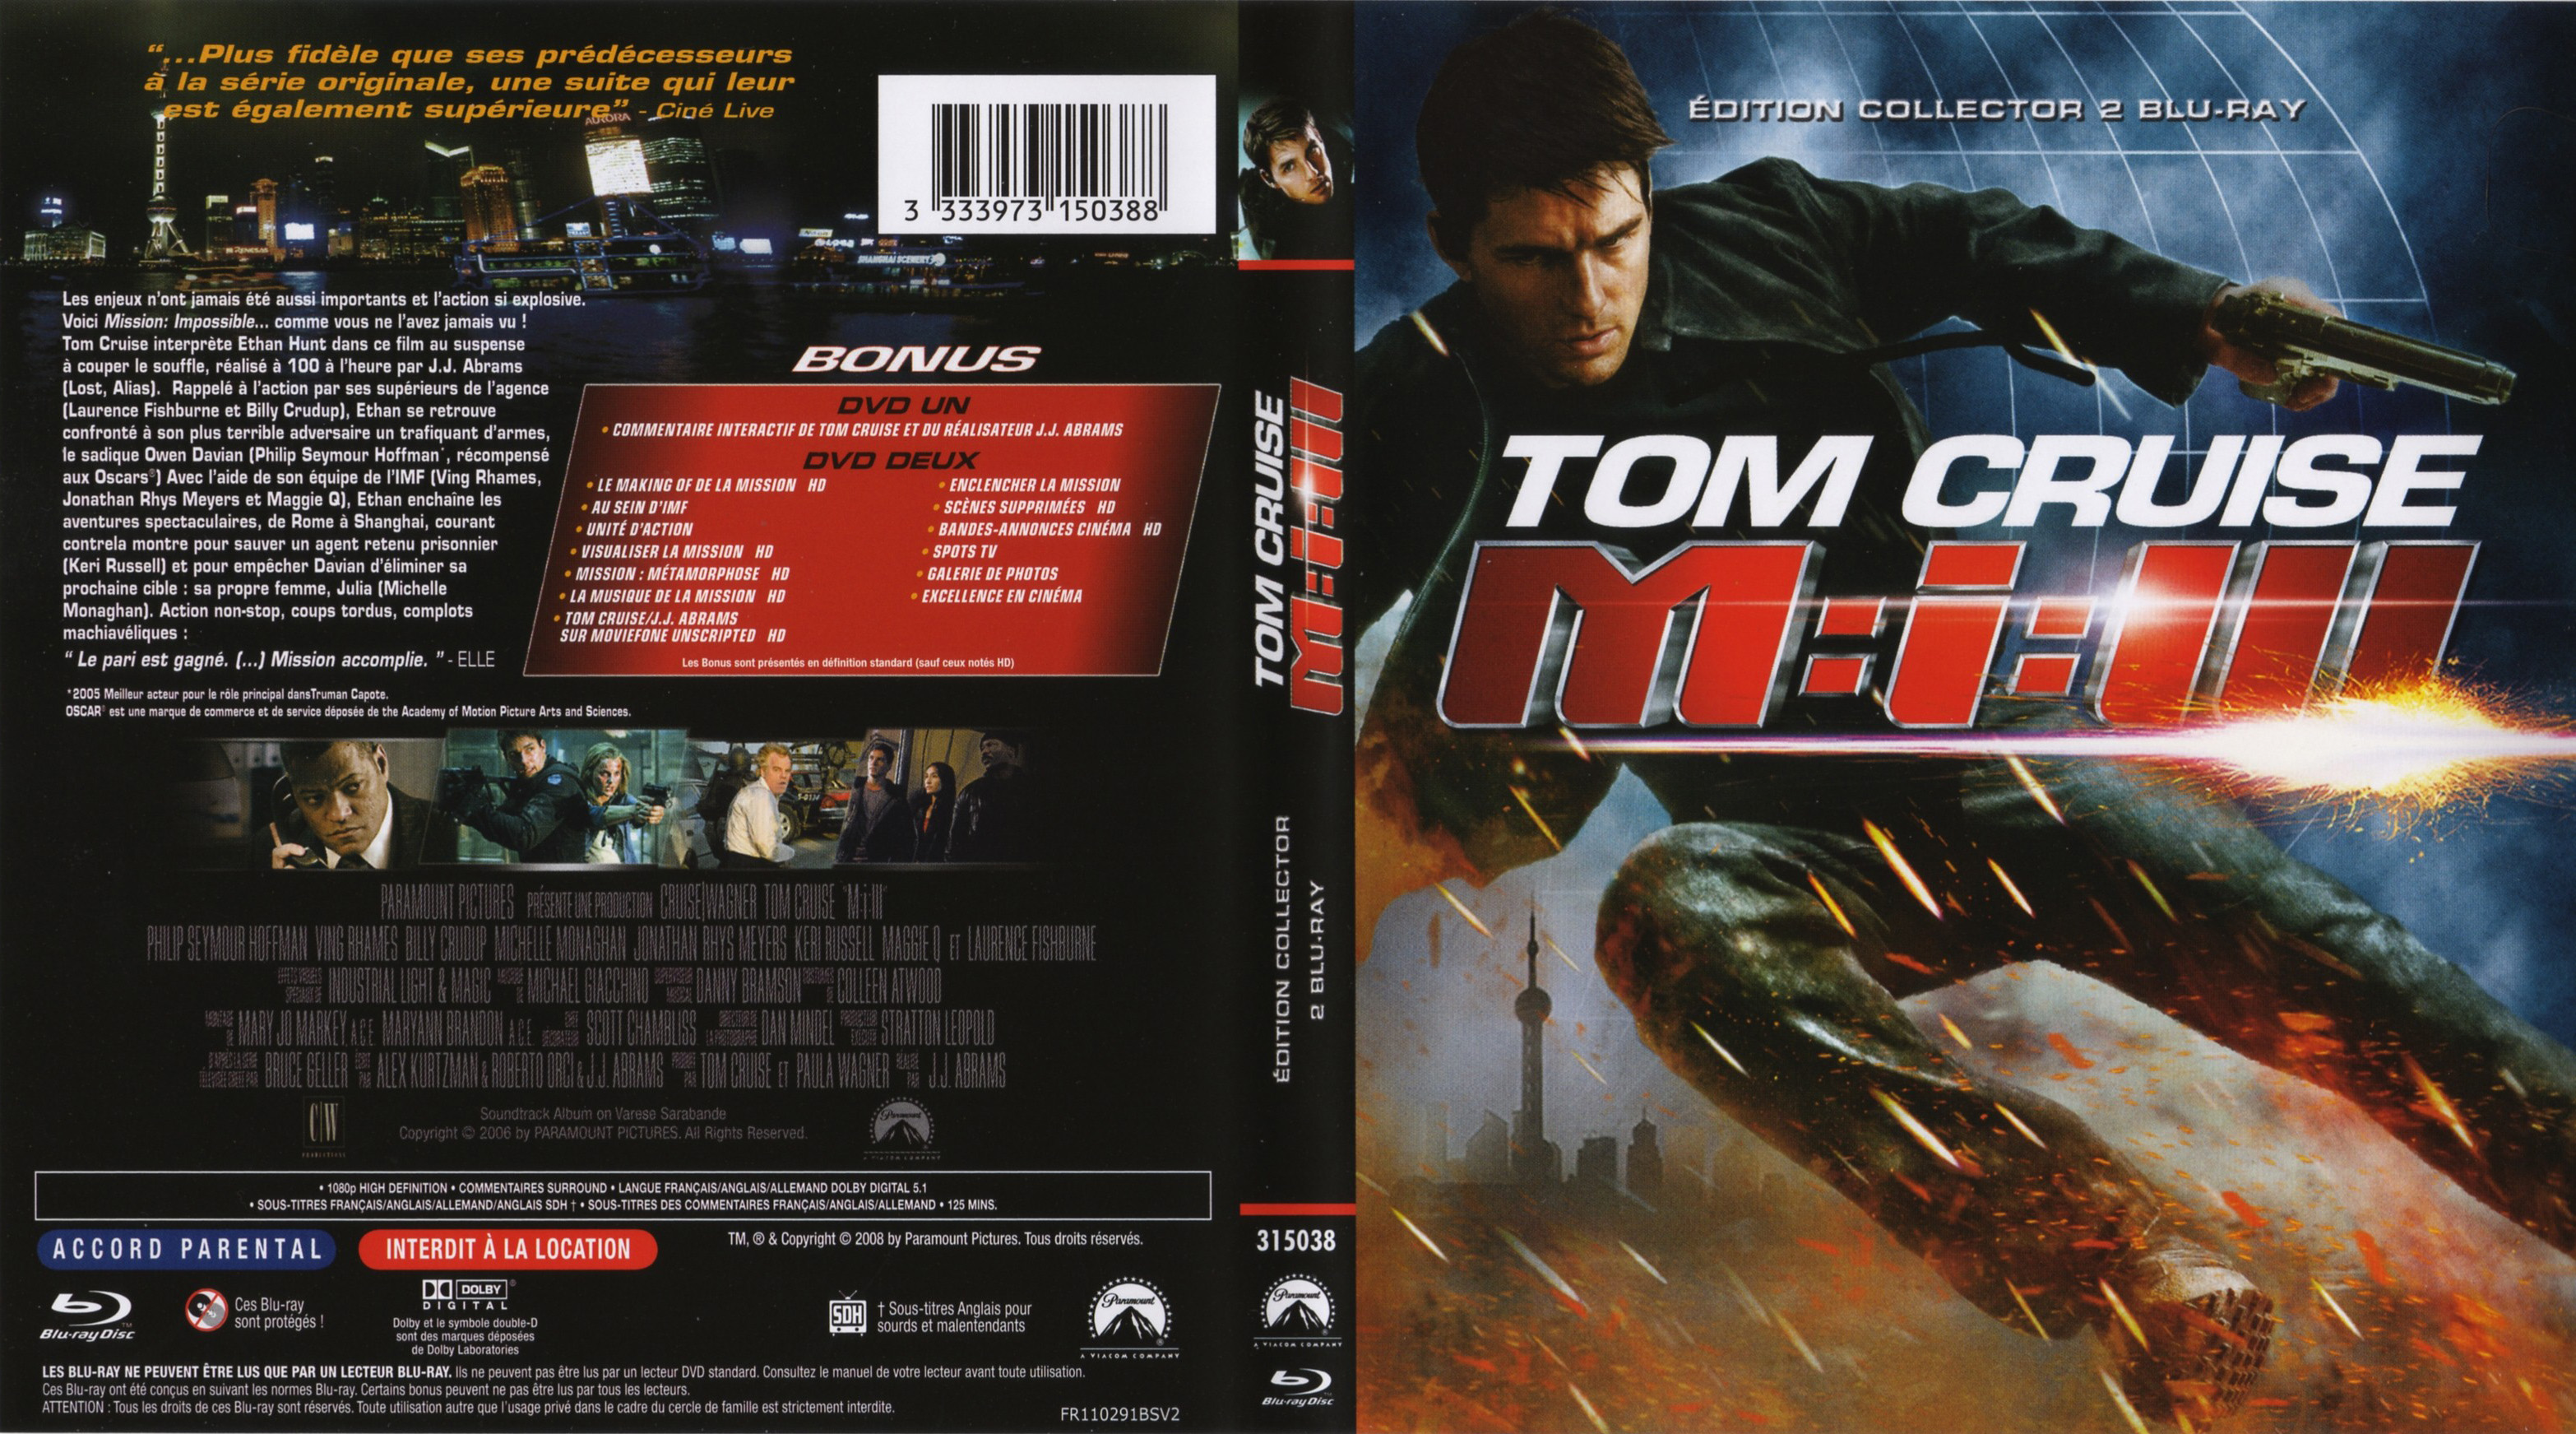 Jaquette DVD Mission impossible 3 (BLU-RAY)